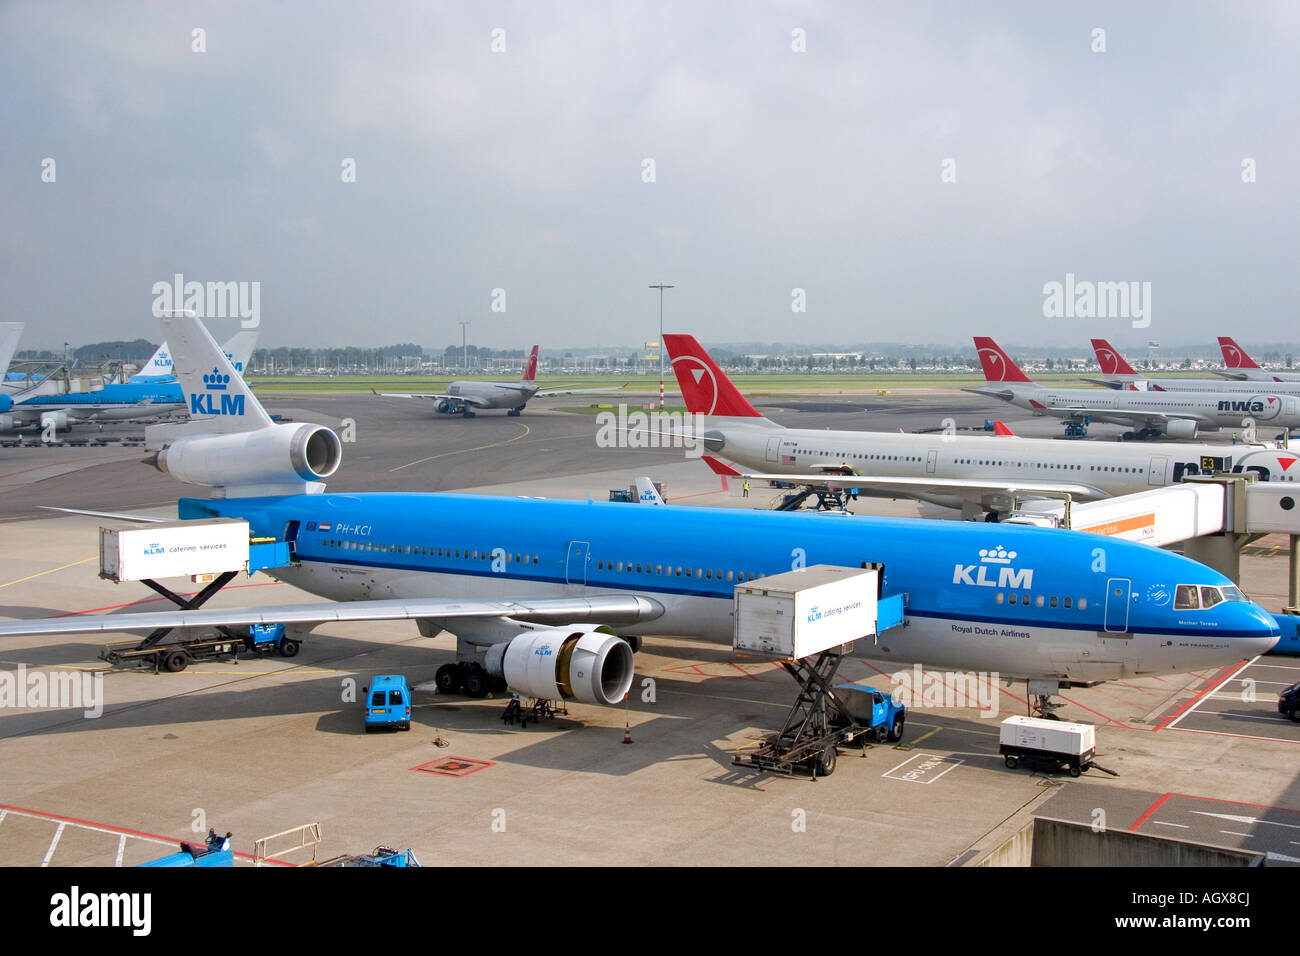 Airplanes at the Schiphol Airport in Amsterdam Netherlands Stock Photo